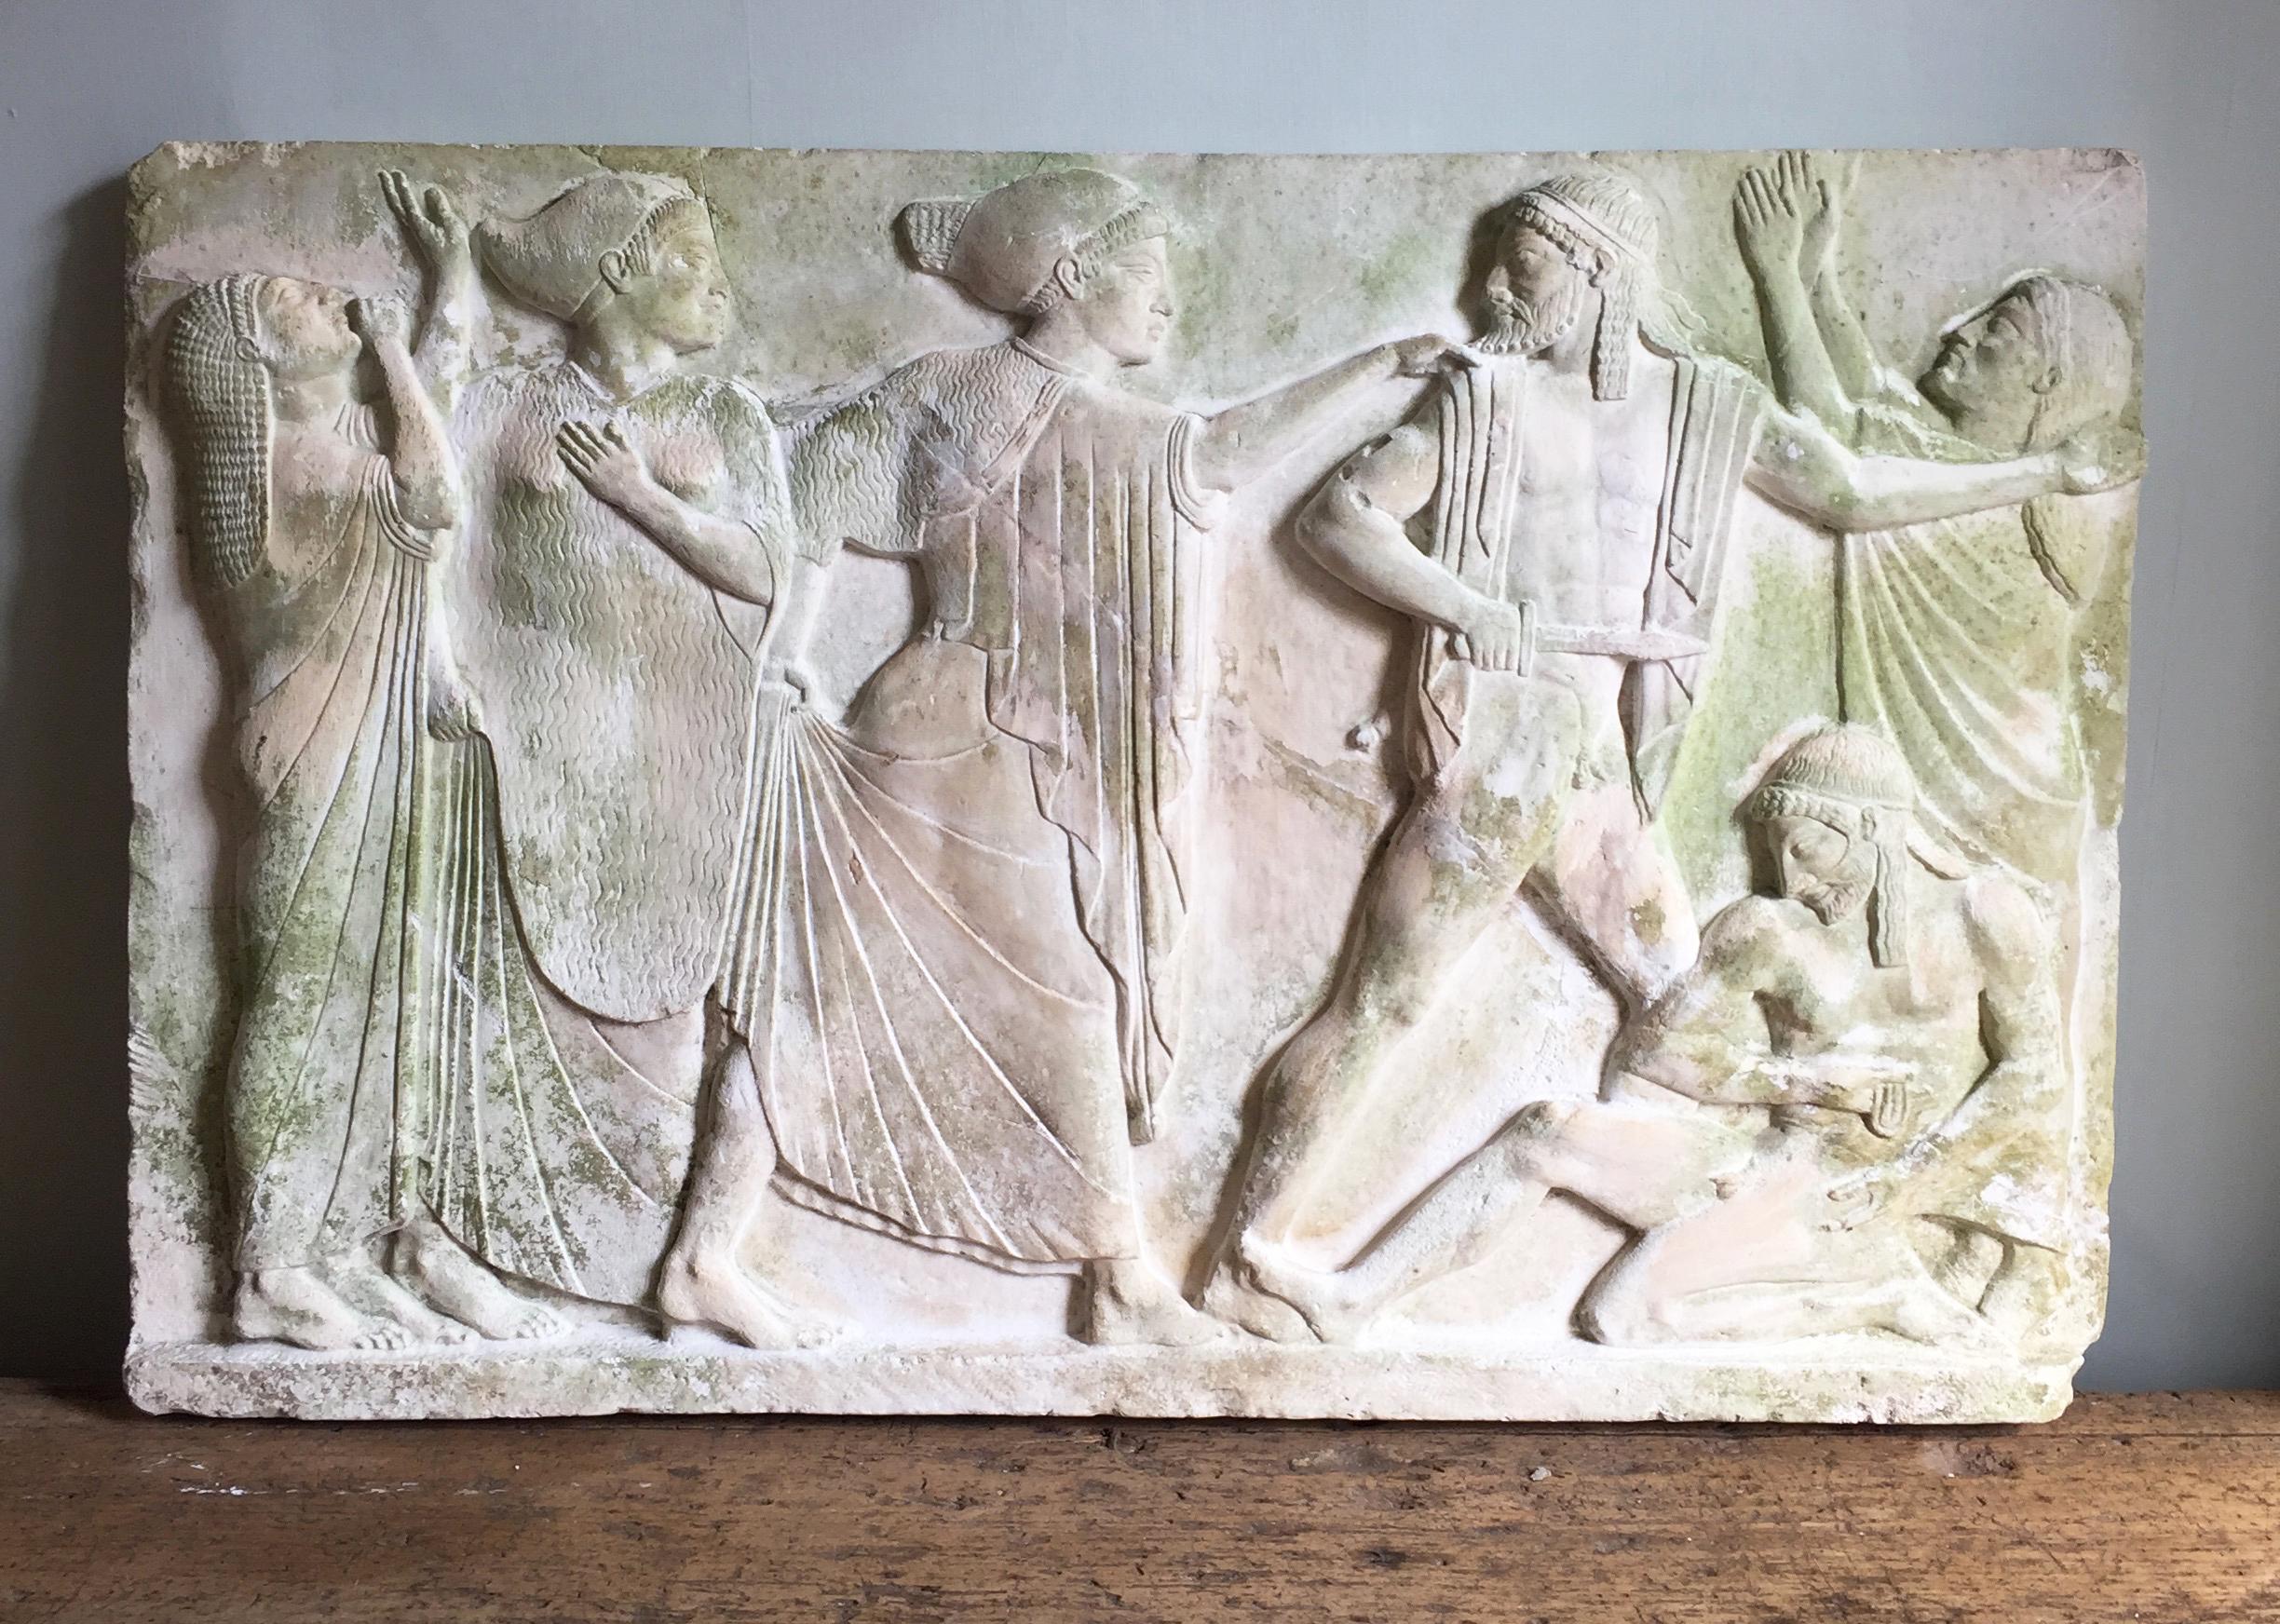 A weathered relief in plaster. The frieze depicts the death of Aigistho.

According to the myths, Aigisthos killed Agamemnon whilst being his wife Clytemnestra’s lover, but was killed himself in revenge by Orestes, son of Clytemnestra and